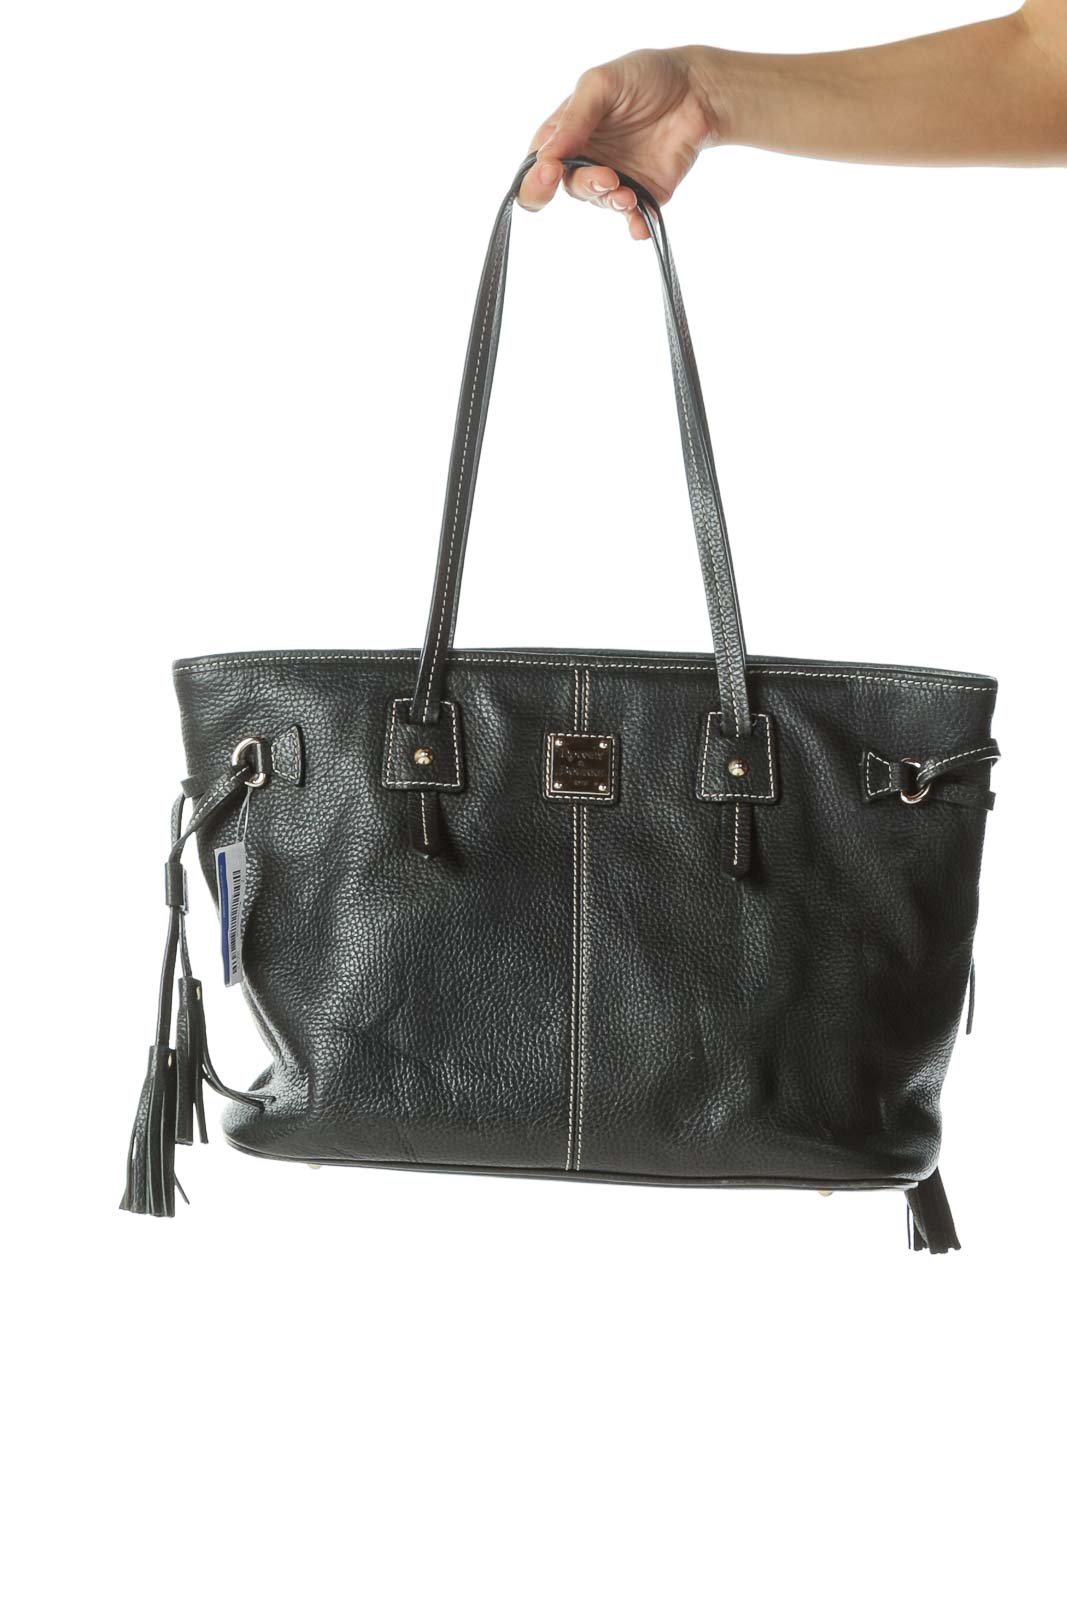 Black Gold Hardware Stitched Tote with Tassels Front